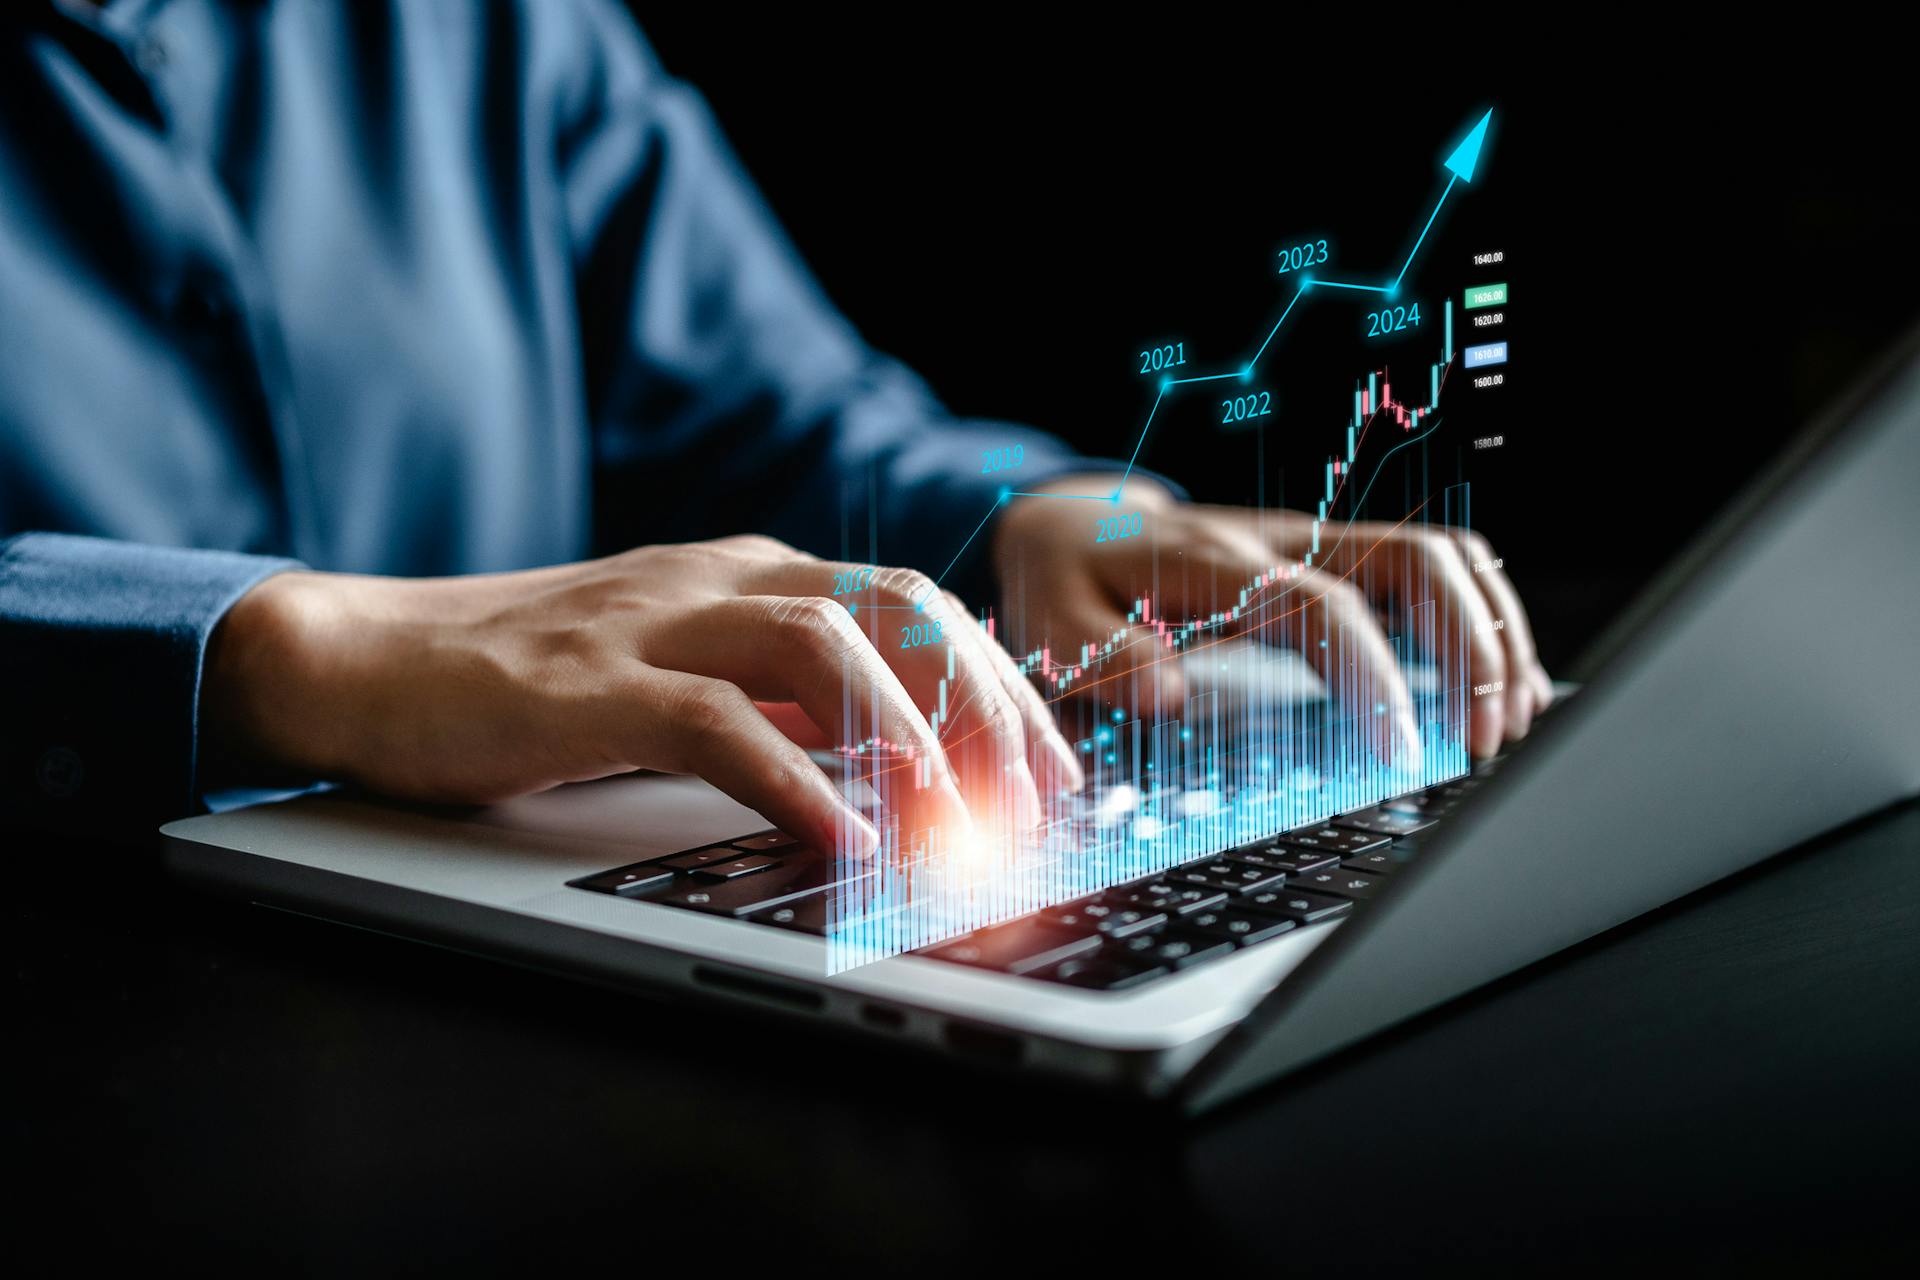 Businesswomen using laptops with virtual screens of graph stock market changes, uptrends, growth economics, business strategy development, and finding investment opportunities.